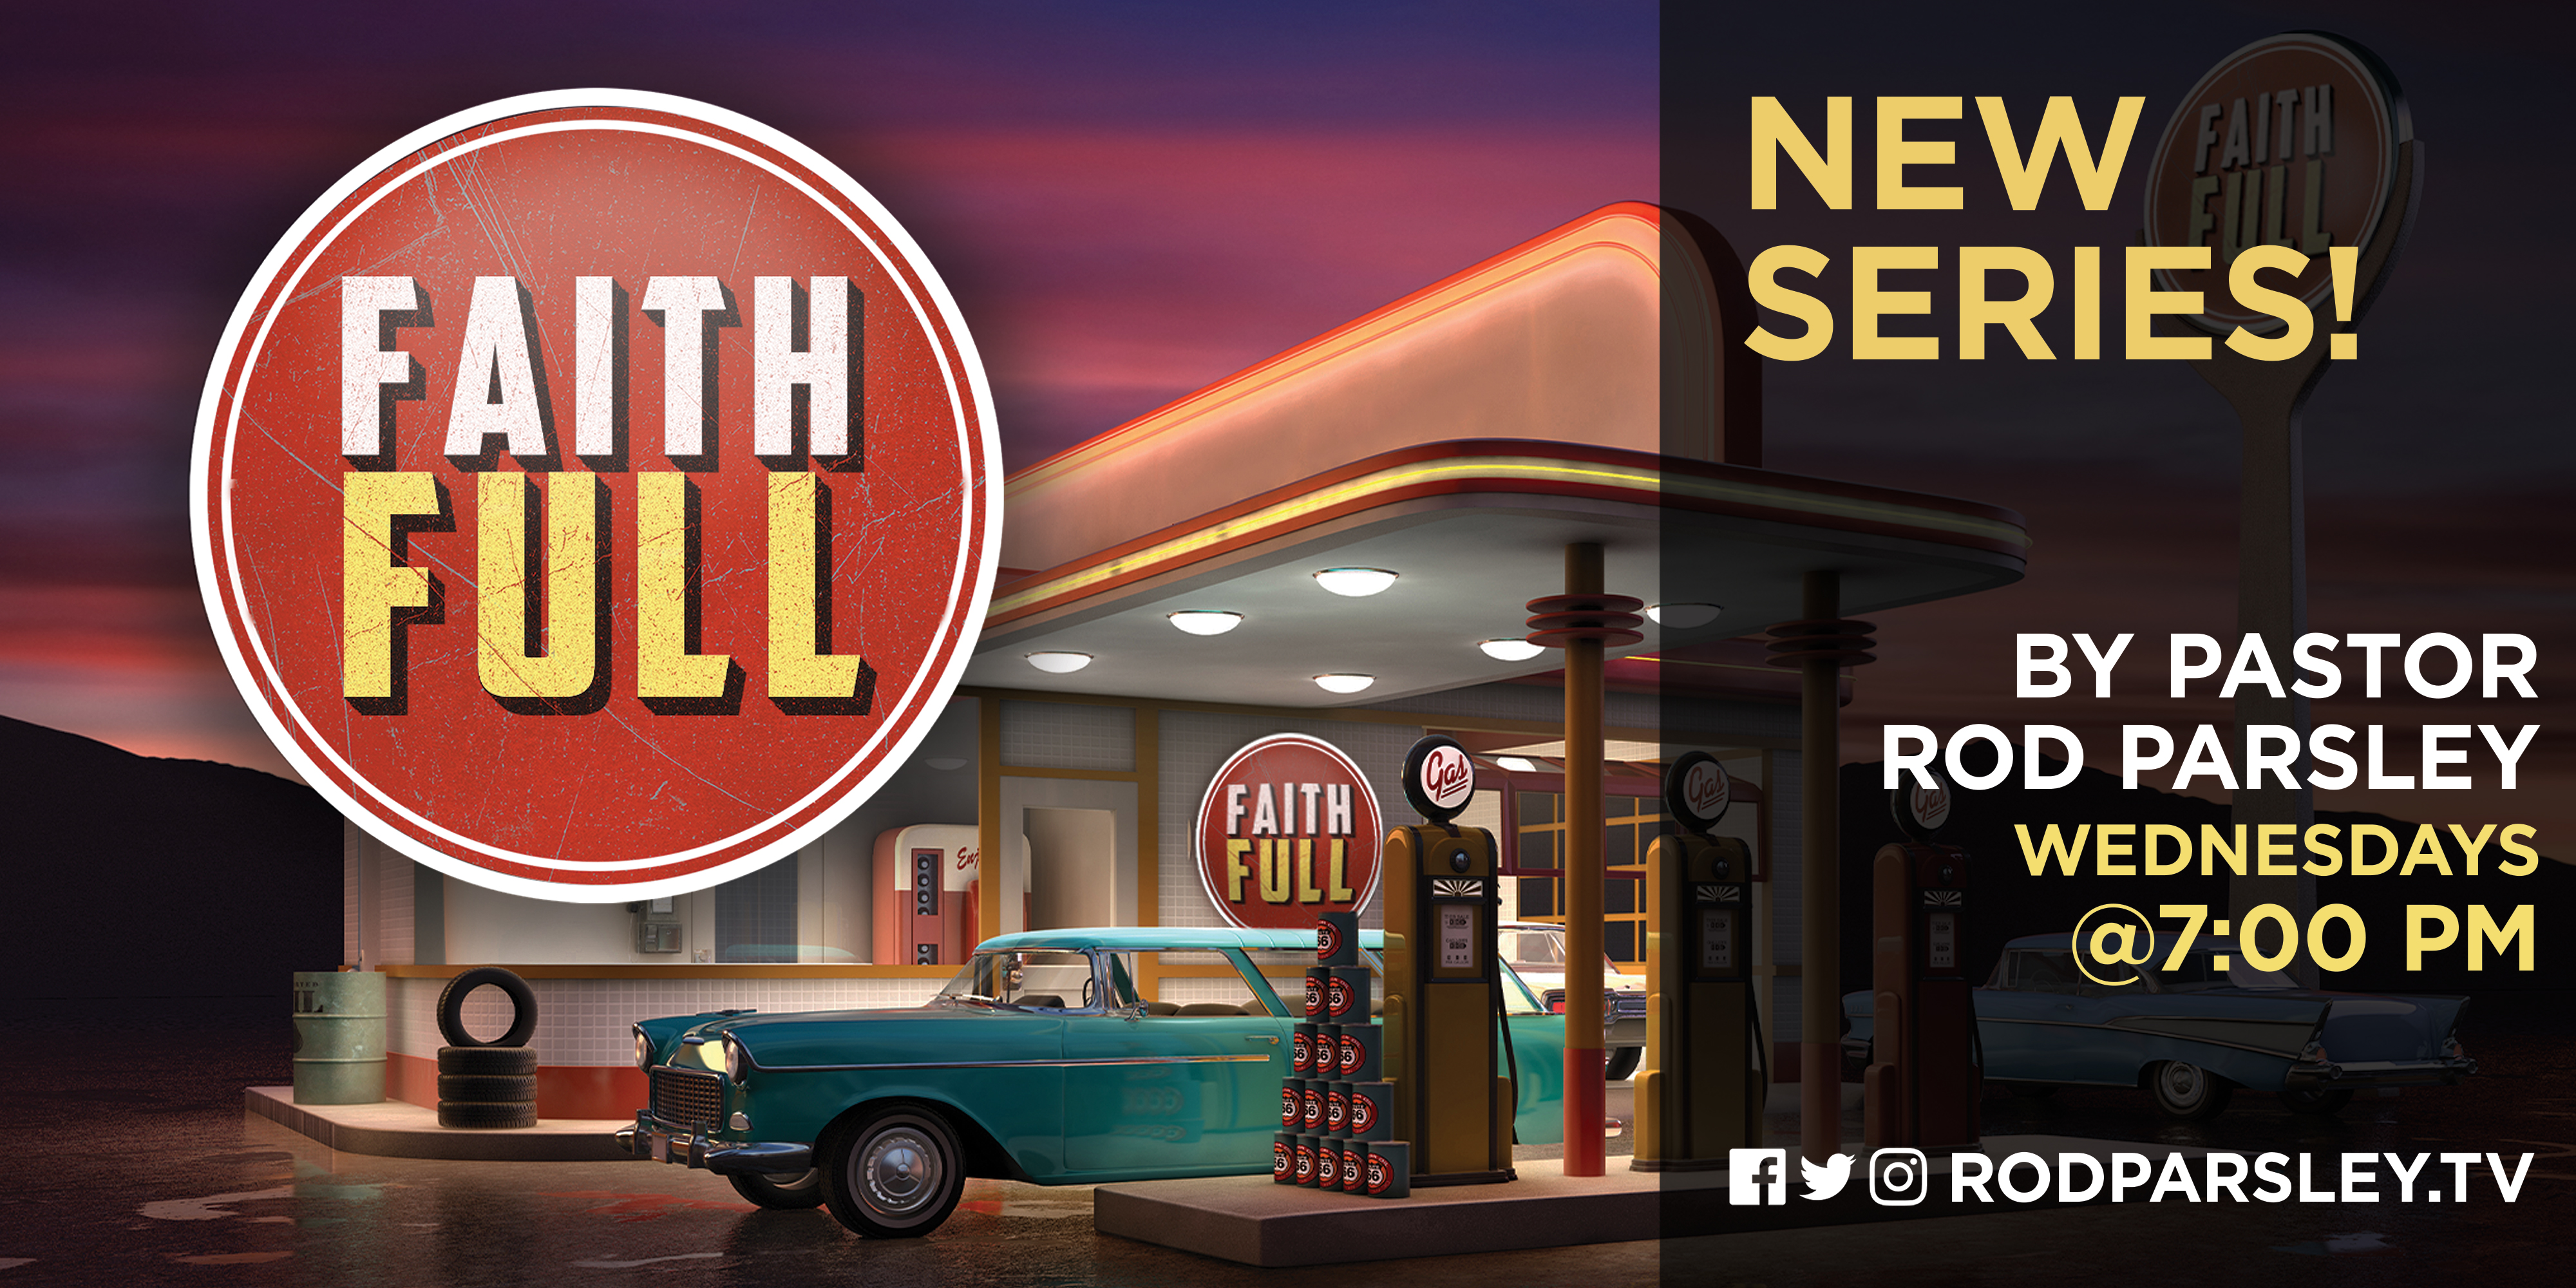 Faith FULL New Series! By Pastor Rod Parsley Wedness @7:00PM Facebook Twitter Instagram Rodparsley.tv